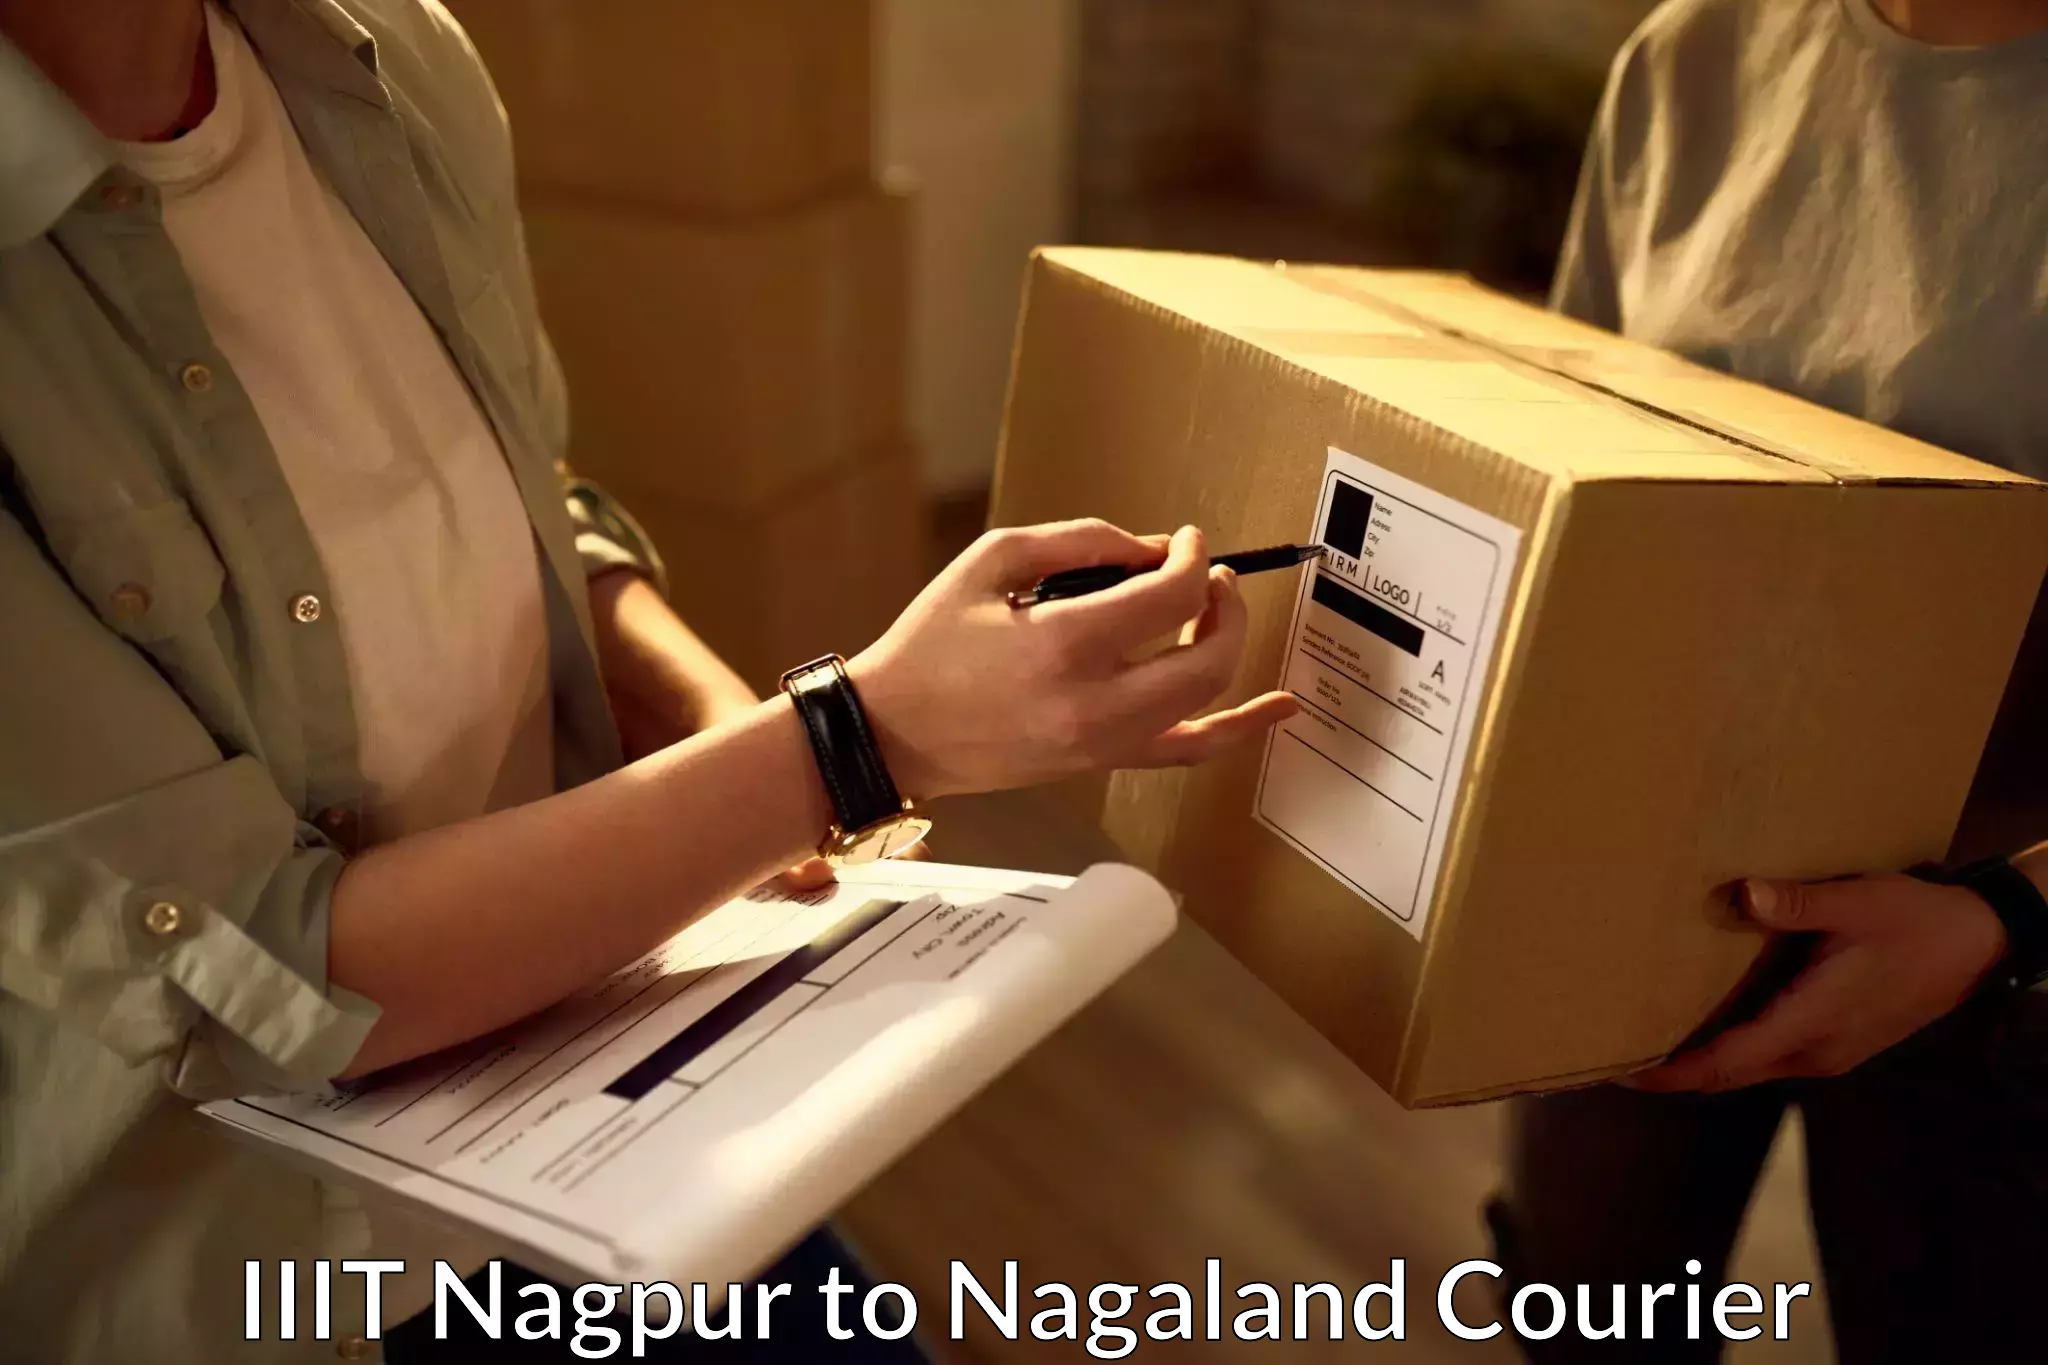 Premium courier solutions IIIT Nagpur to Nagaland